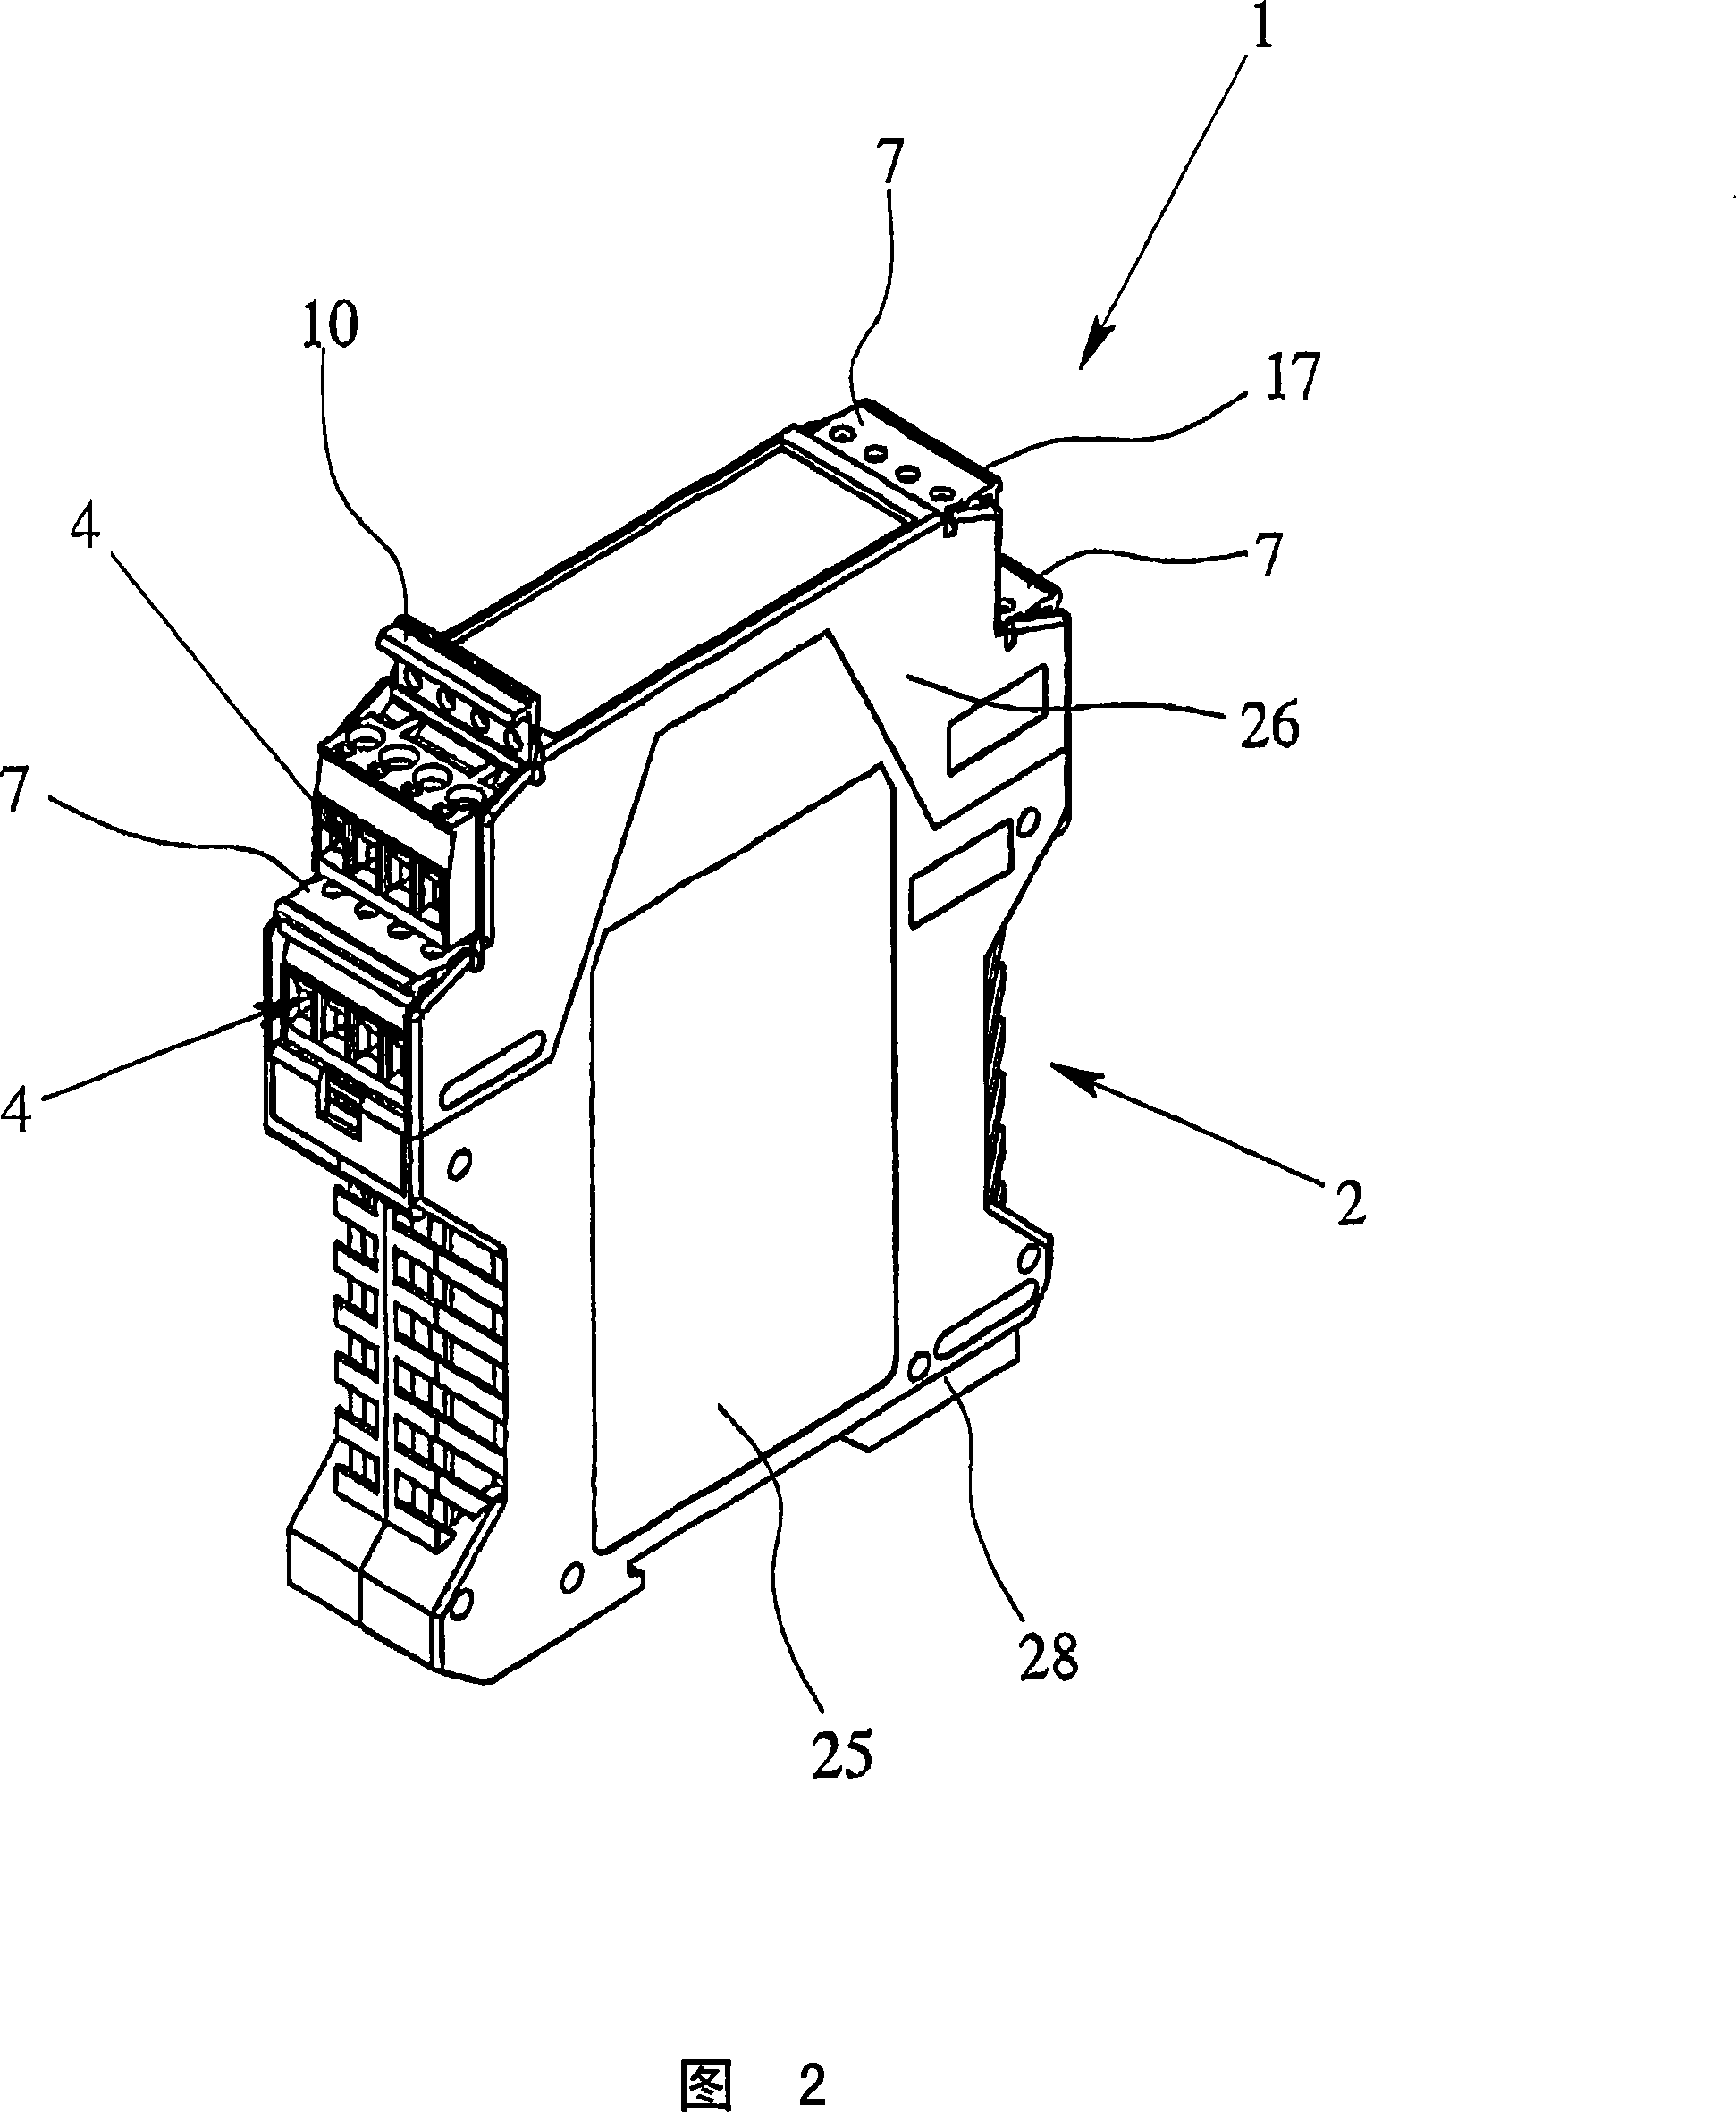 Electric appliance or electronic device